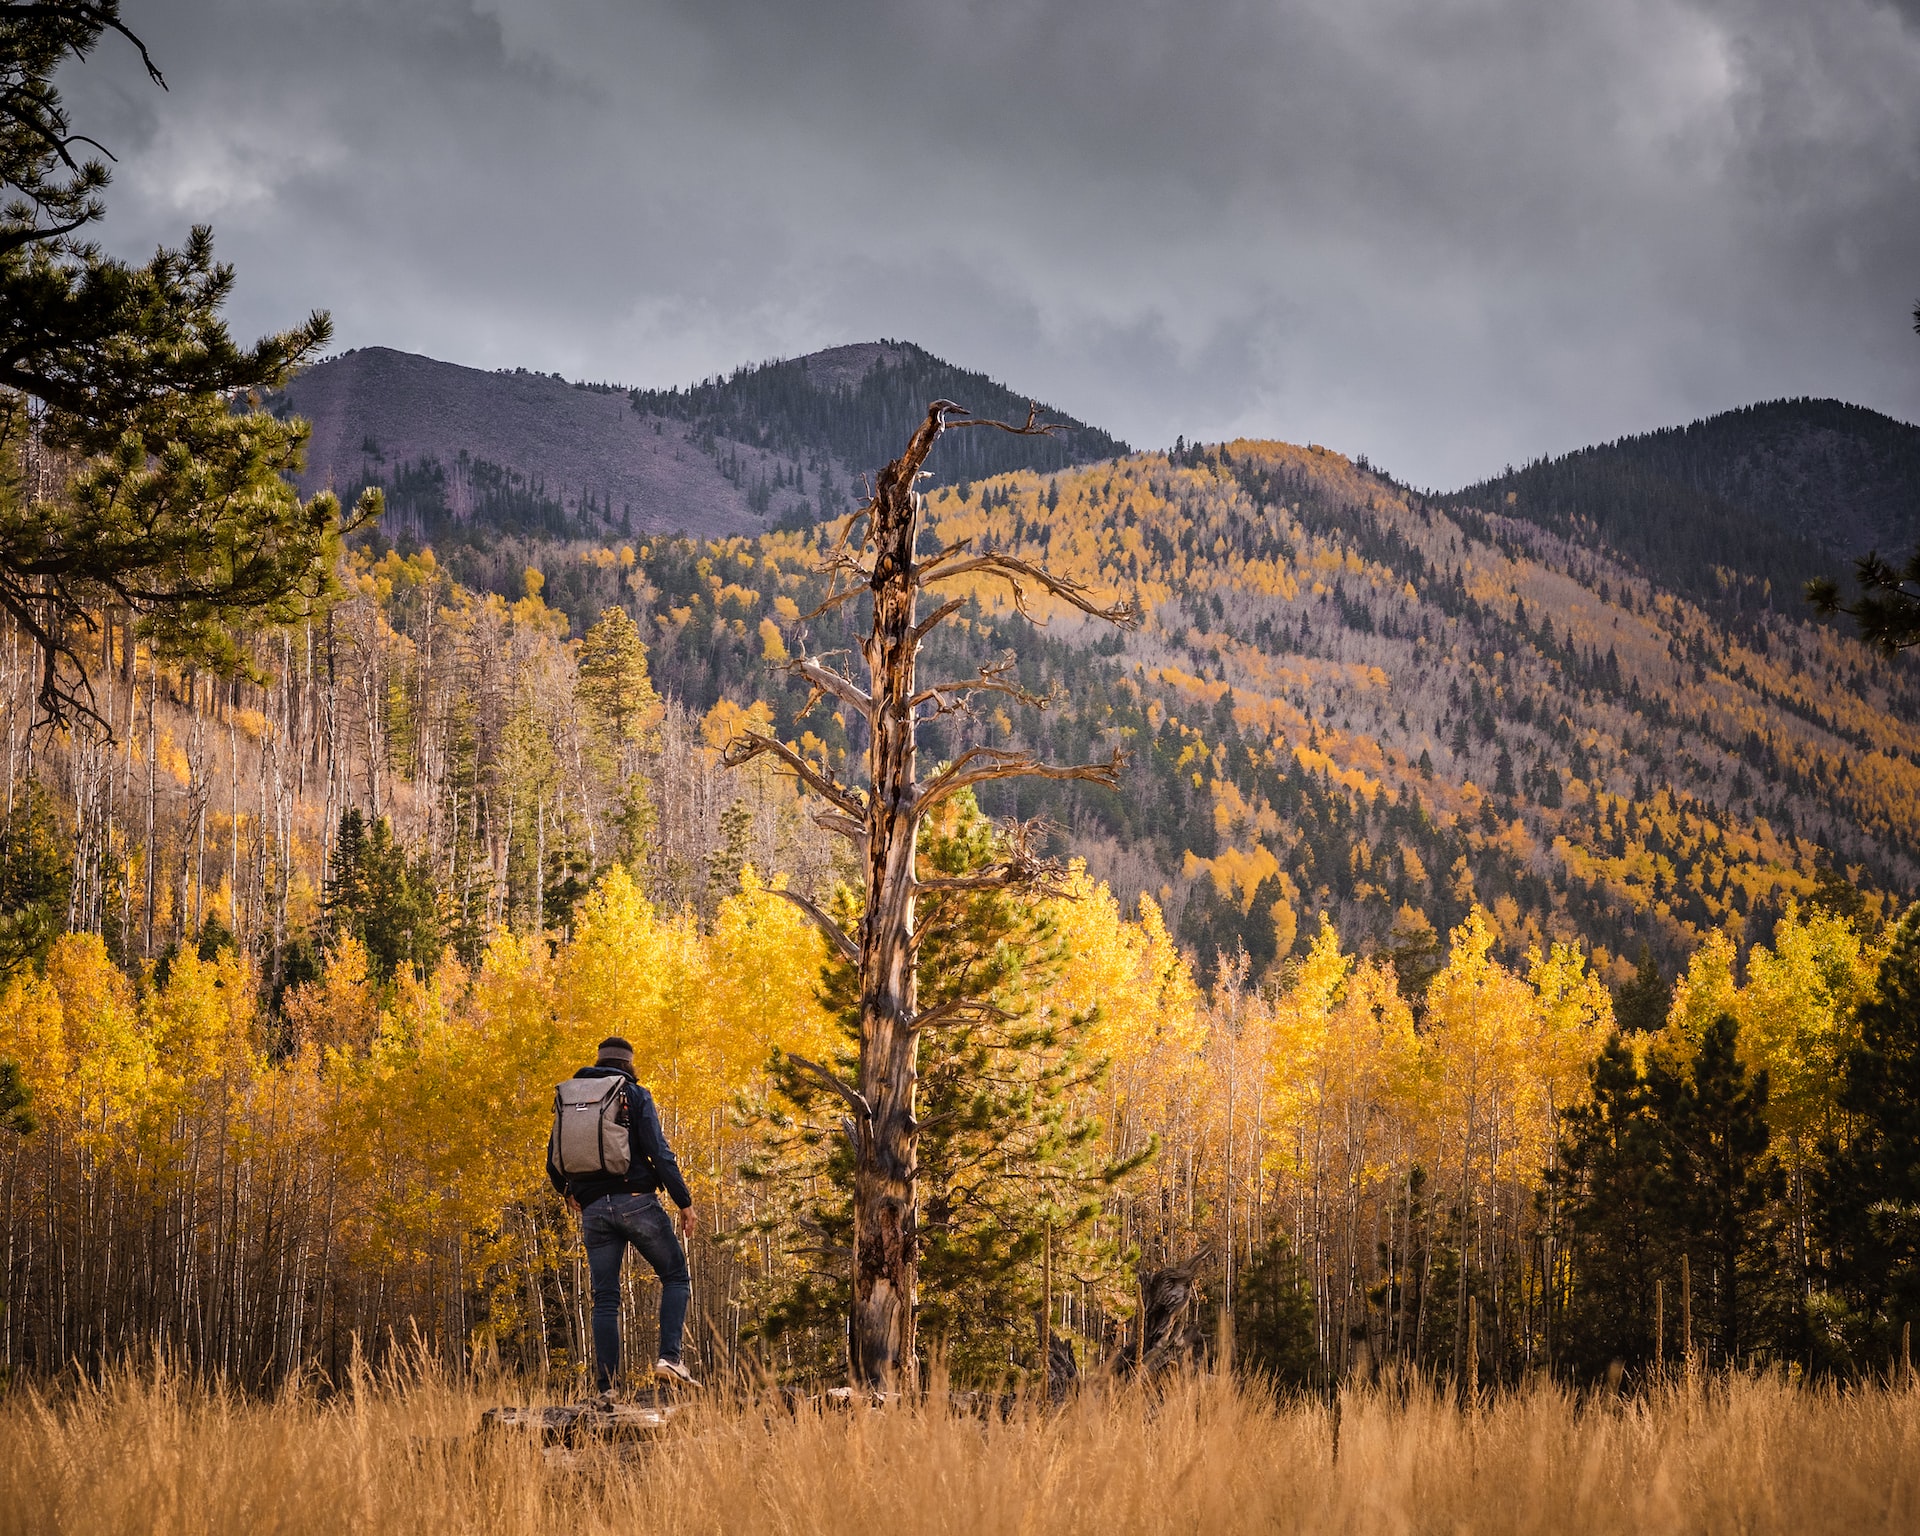 A man stands with his back turned to the camera in hiking gear and a hiking backpack facing bursting colors of fall foliage.